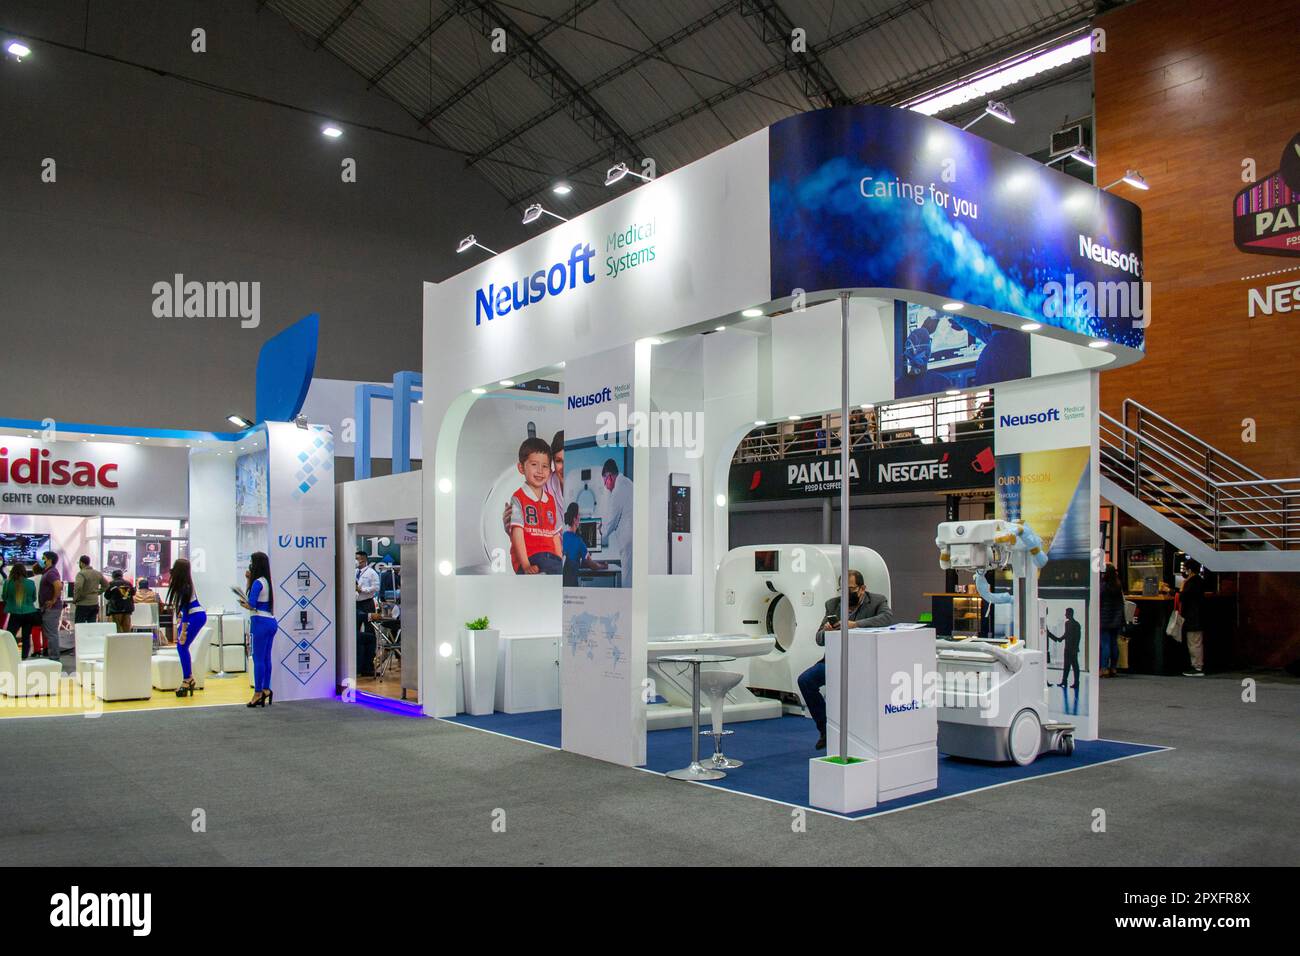 Exhibition of stands of different business brands at the Tecnosalud Peru 2021 event. Stock Photo